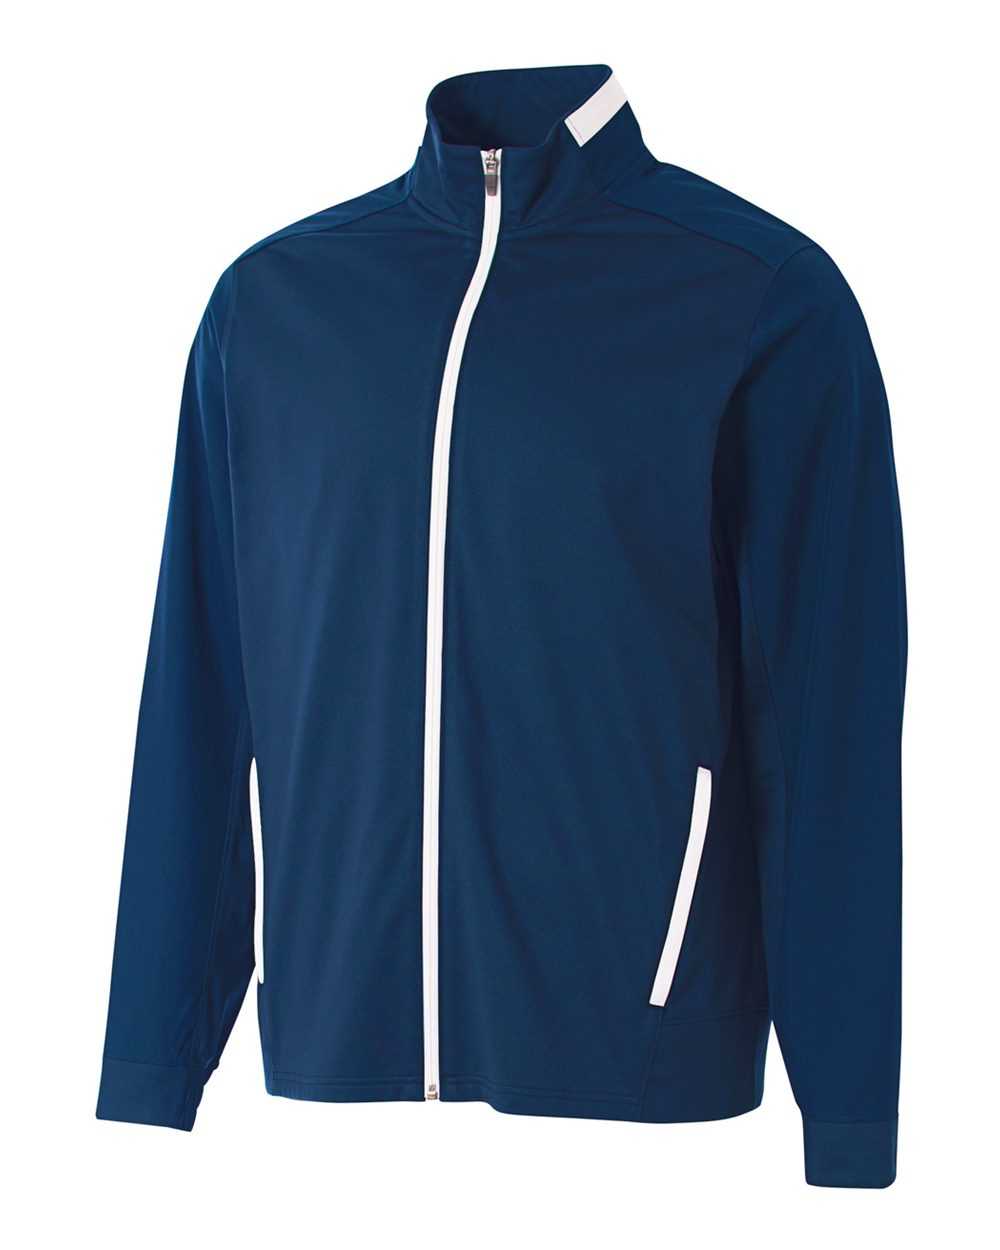 A4 N4261 League Full Zip Warm Up Jacket - Navy White - HIT a Double